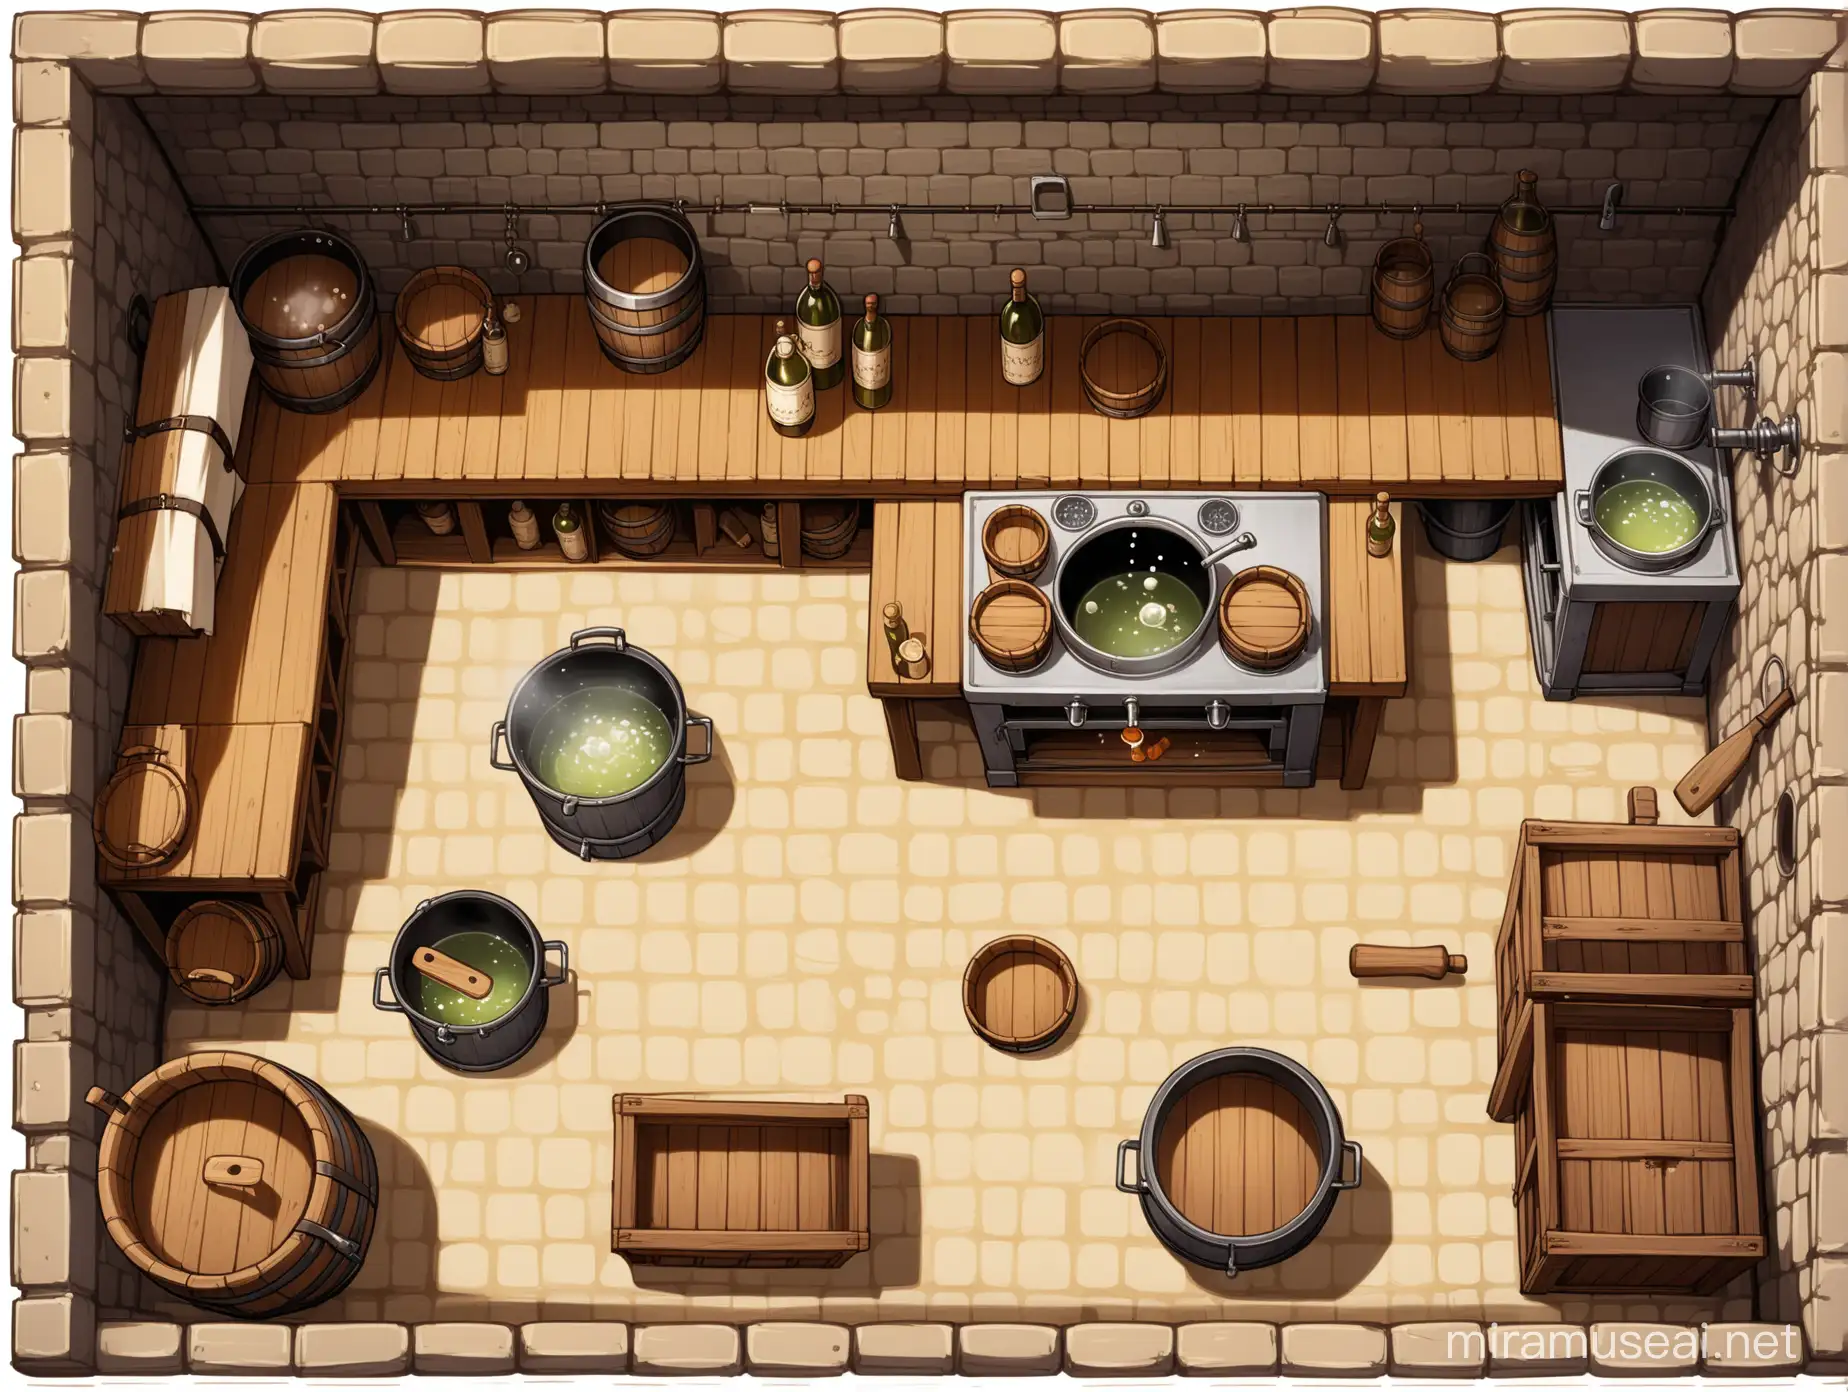 Medieval Kitchen Scene with Oven Cauldron and Pantry